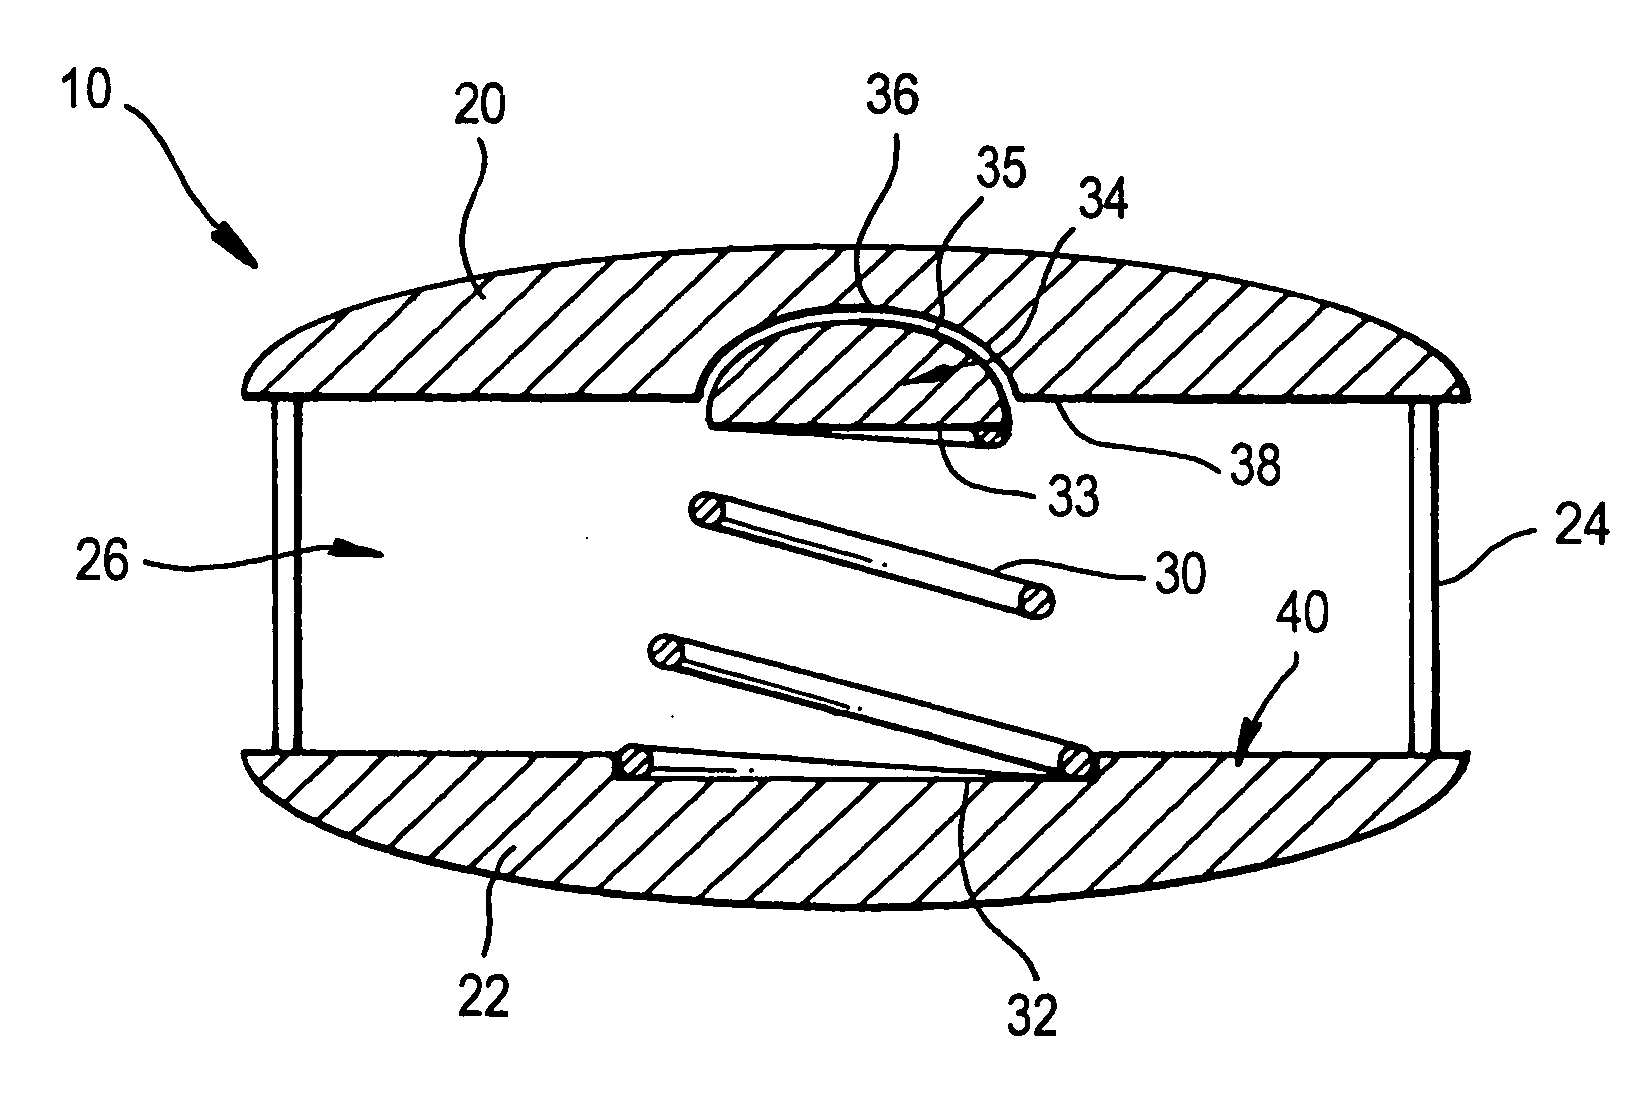 Controlled artificial intervertebral disc implant